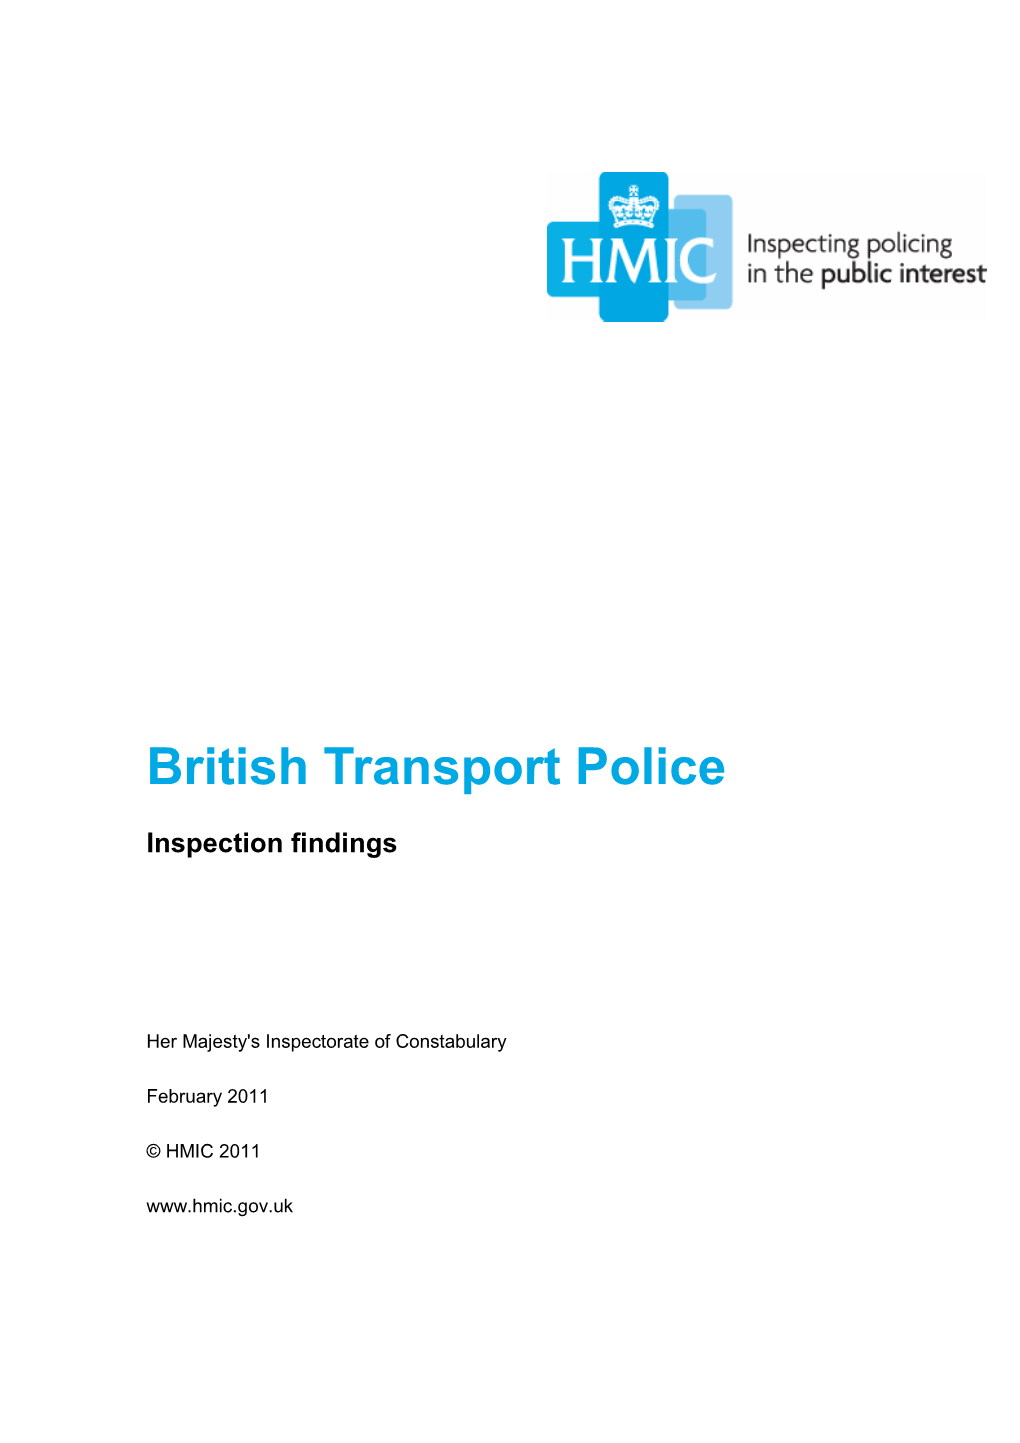 British Transport Police, Inspection Findings